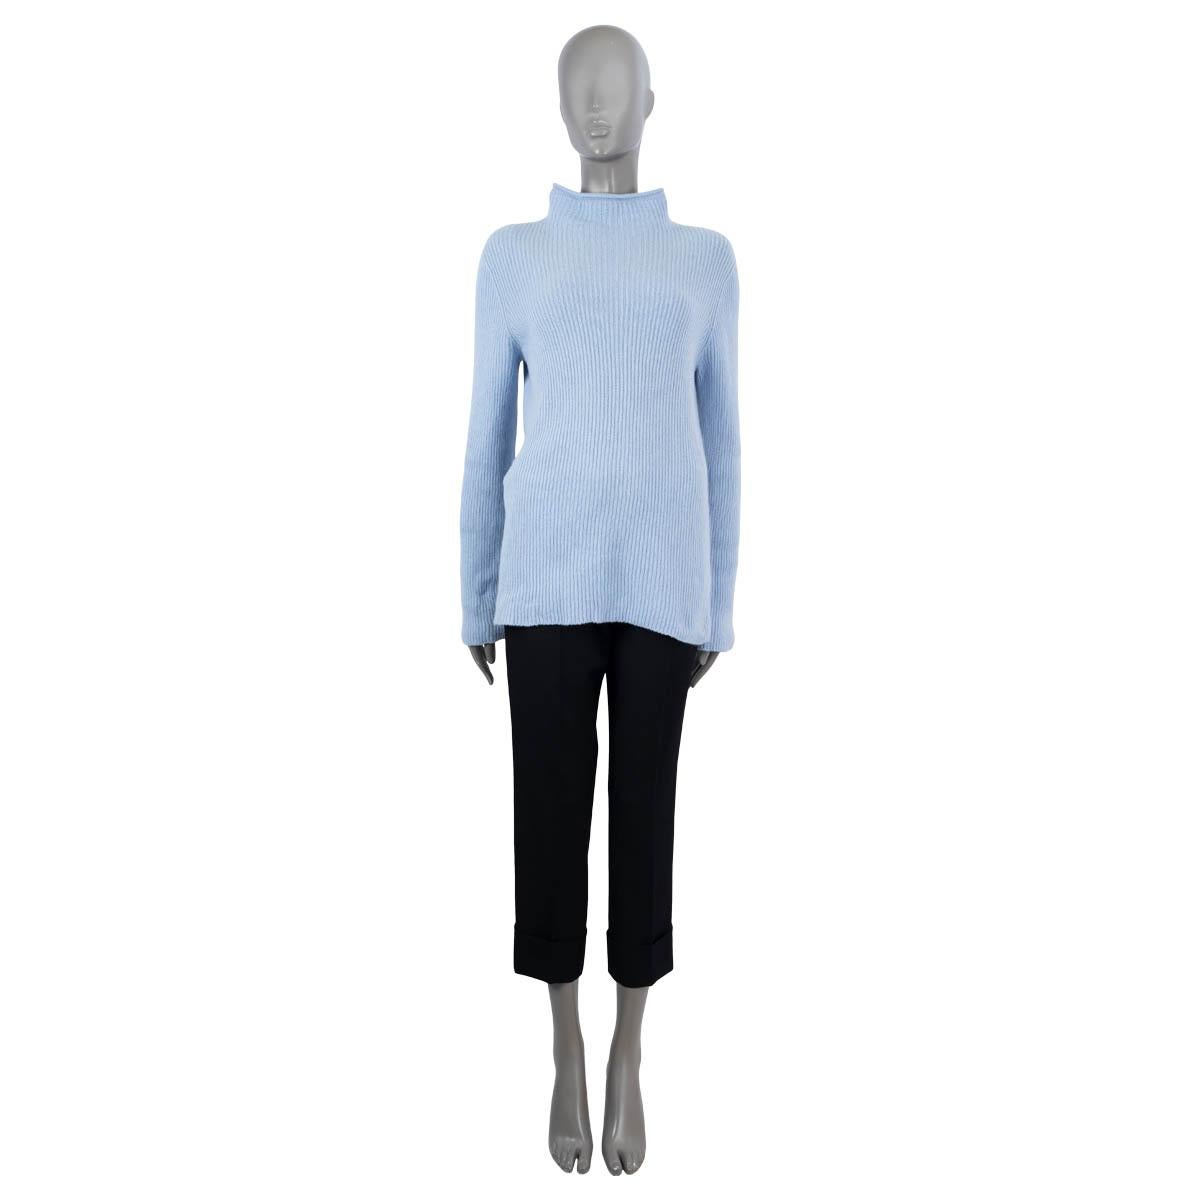 100% authentic The Row rib-knit sweater in baby blue wool (65%) and cashmere (35%). Features a longline silhoutter, a mock-neck and long sleeves. Unlined. Has been worn and is in excellent condition.

Measurements
Tag Size	S
Size	S
Shoulder